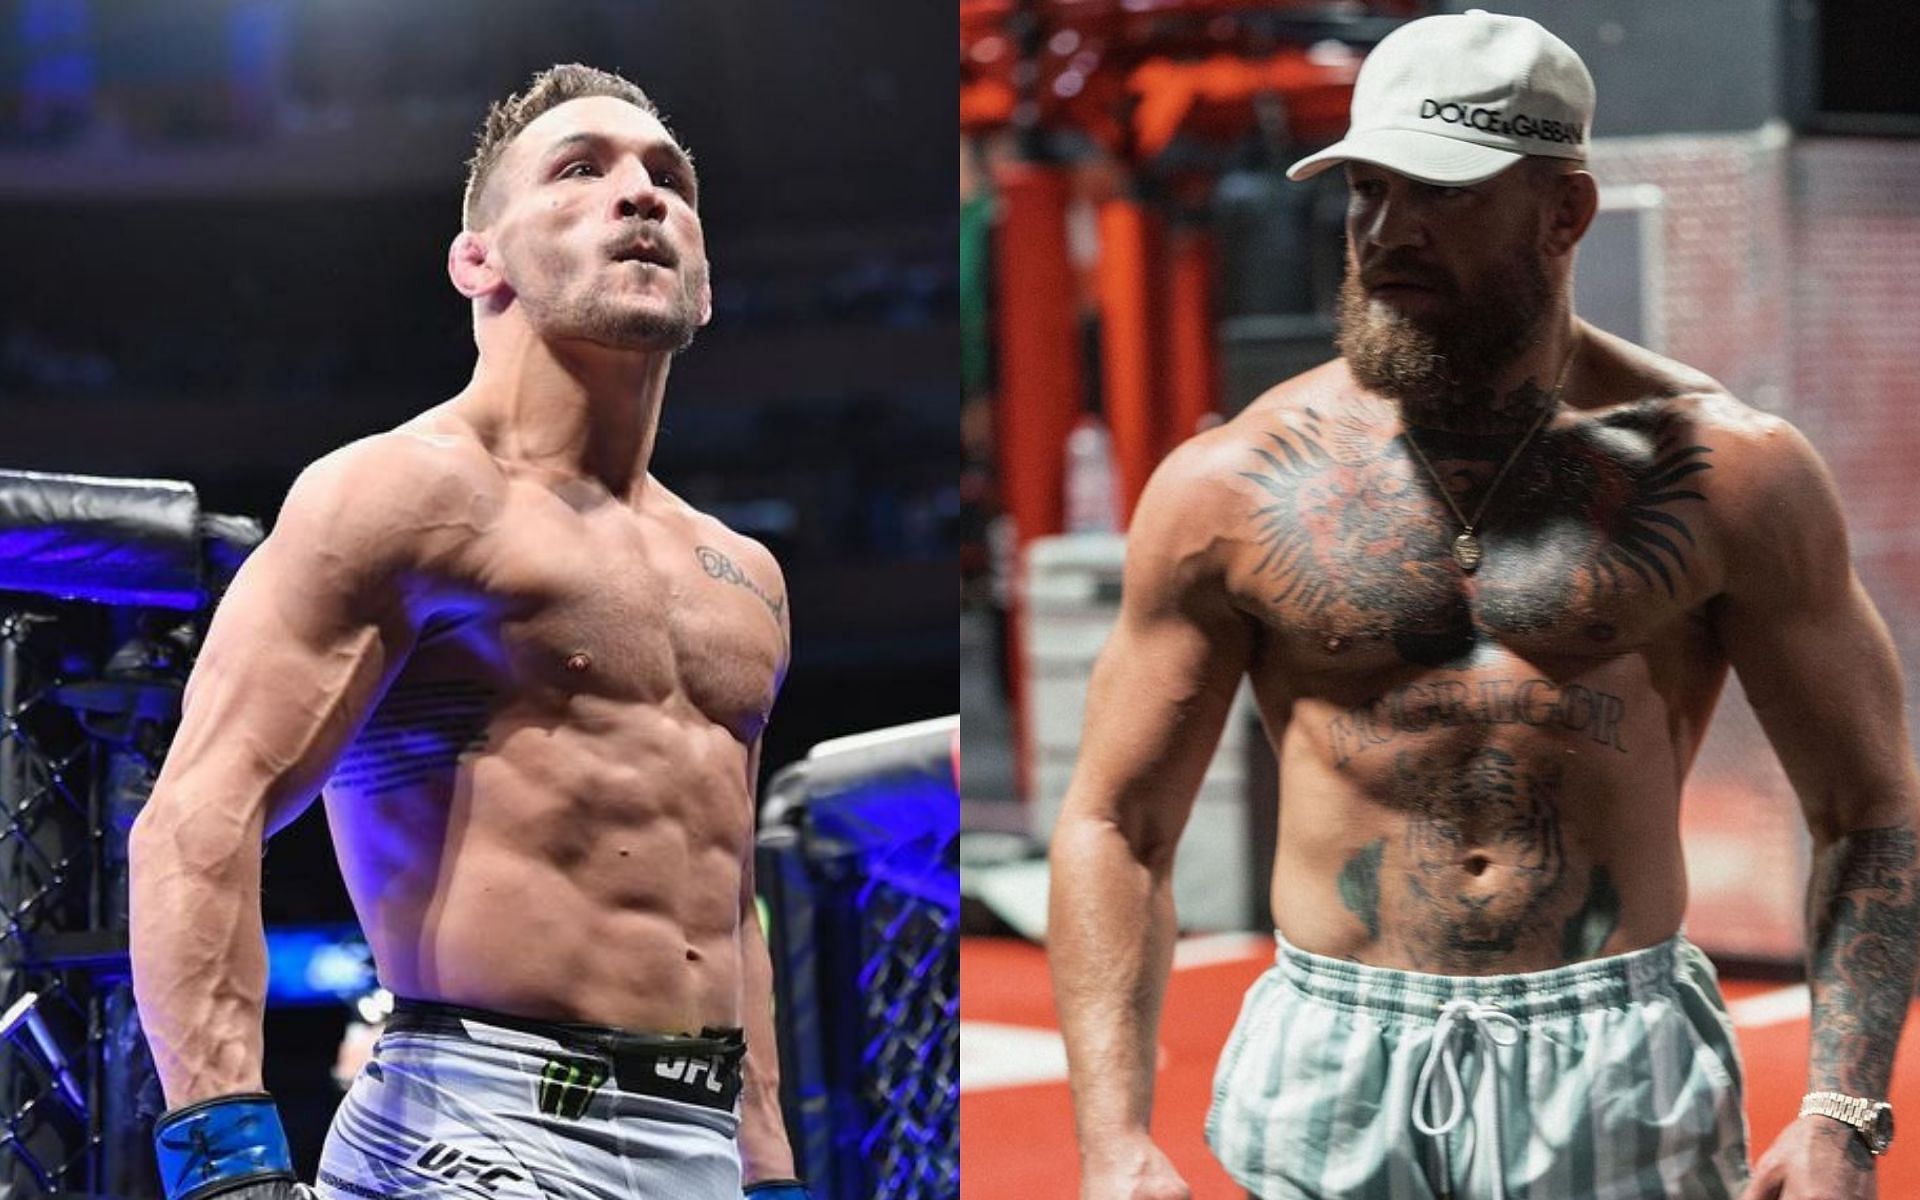 Michael Chandler (left), Conor McGregor (right) [Image courtesy: @mikechandlermma and @thenotoriousmma]